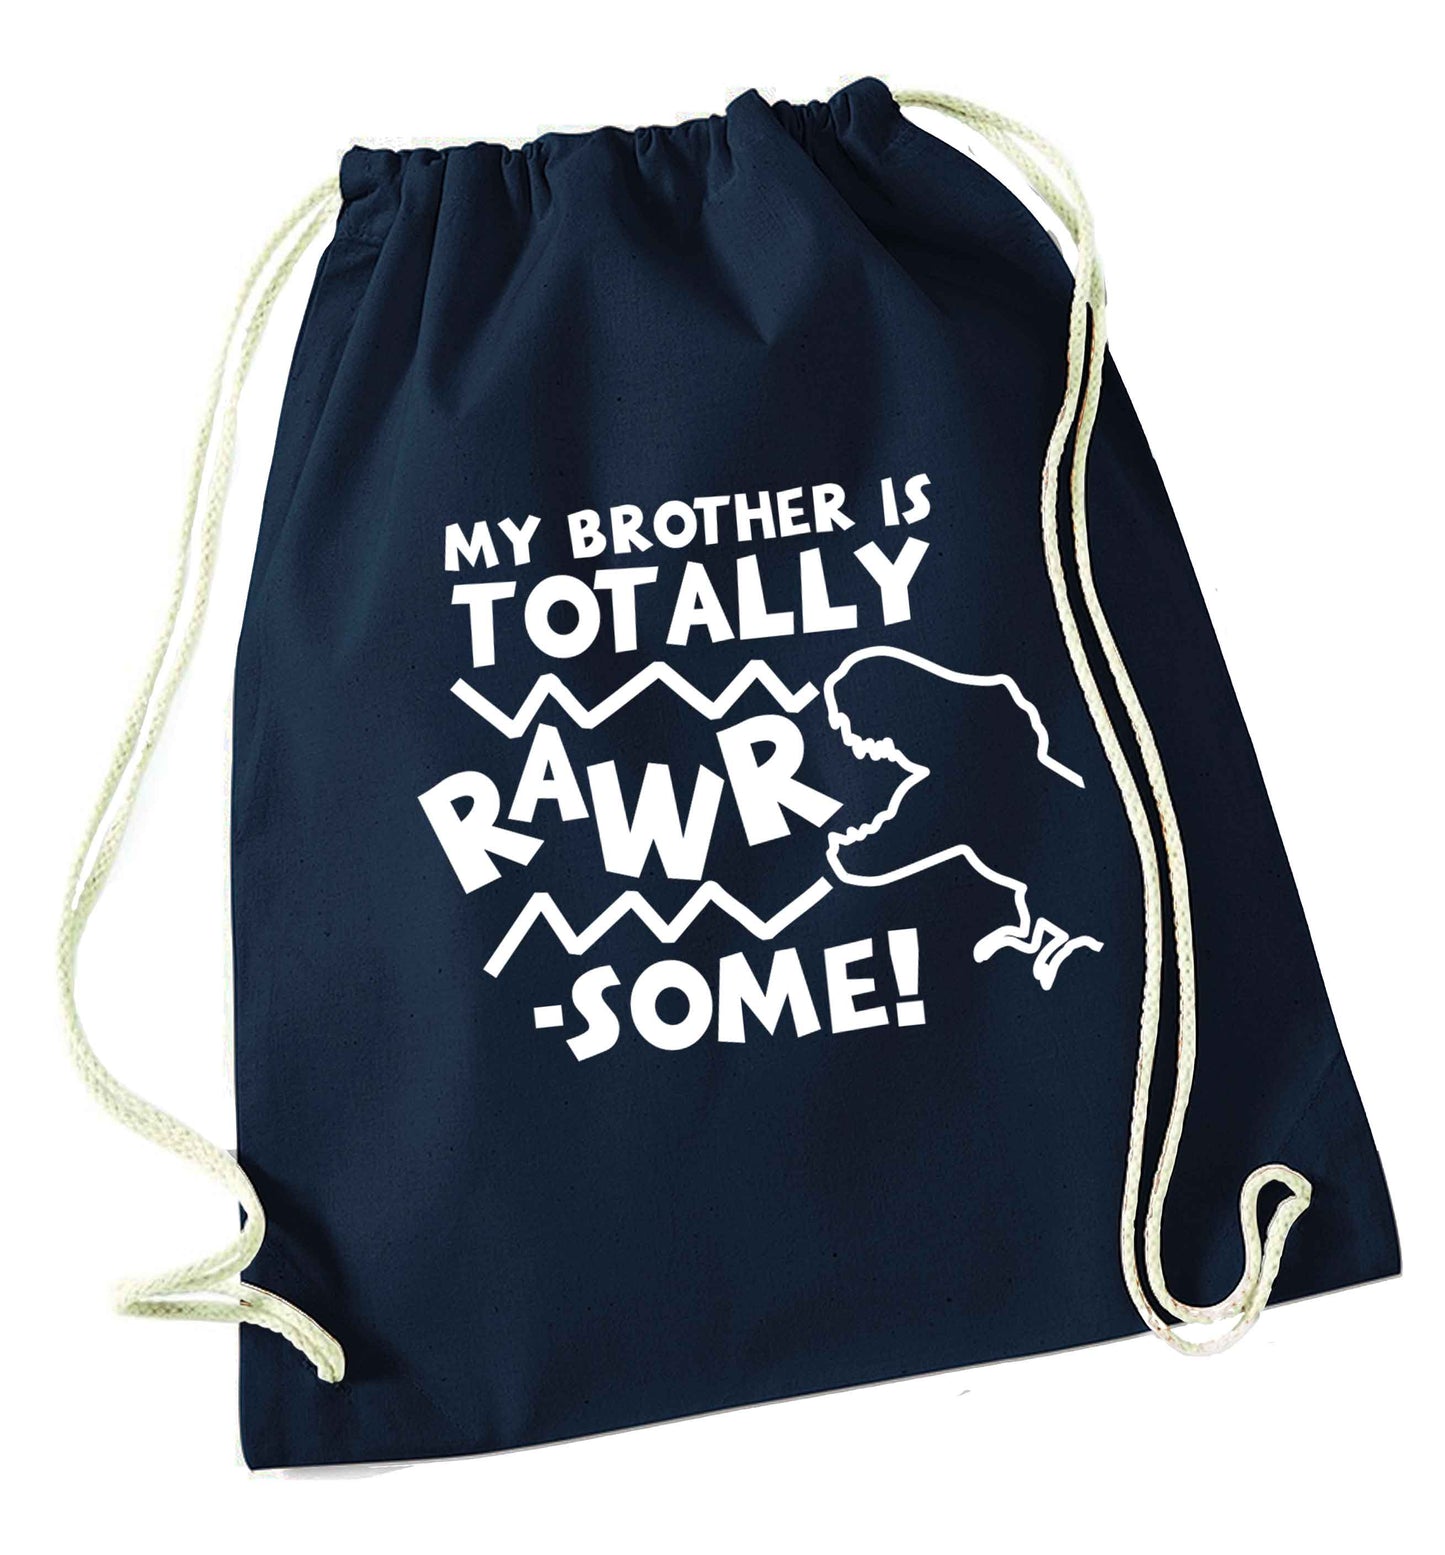 My brother is totally rawrsome navy drawstring bag